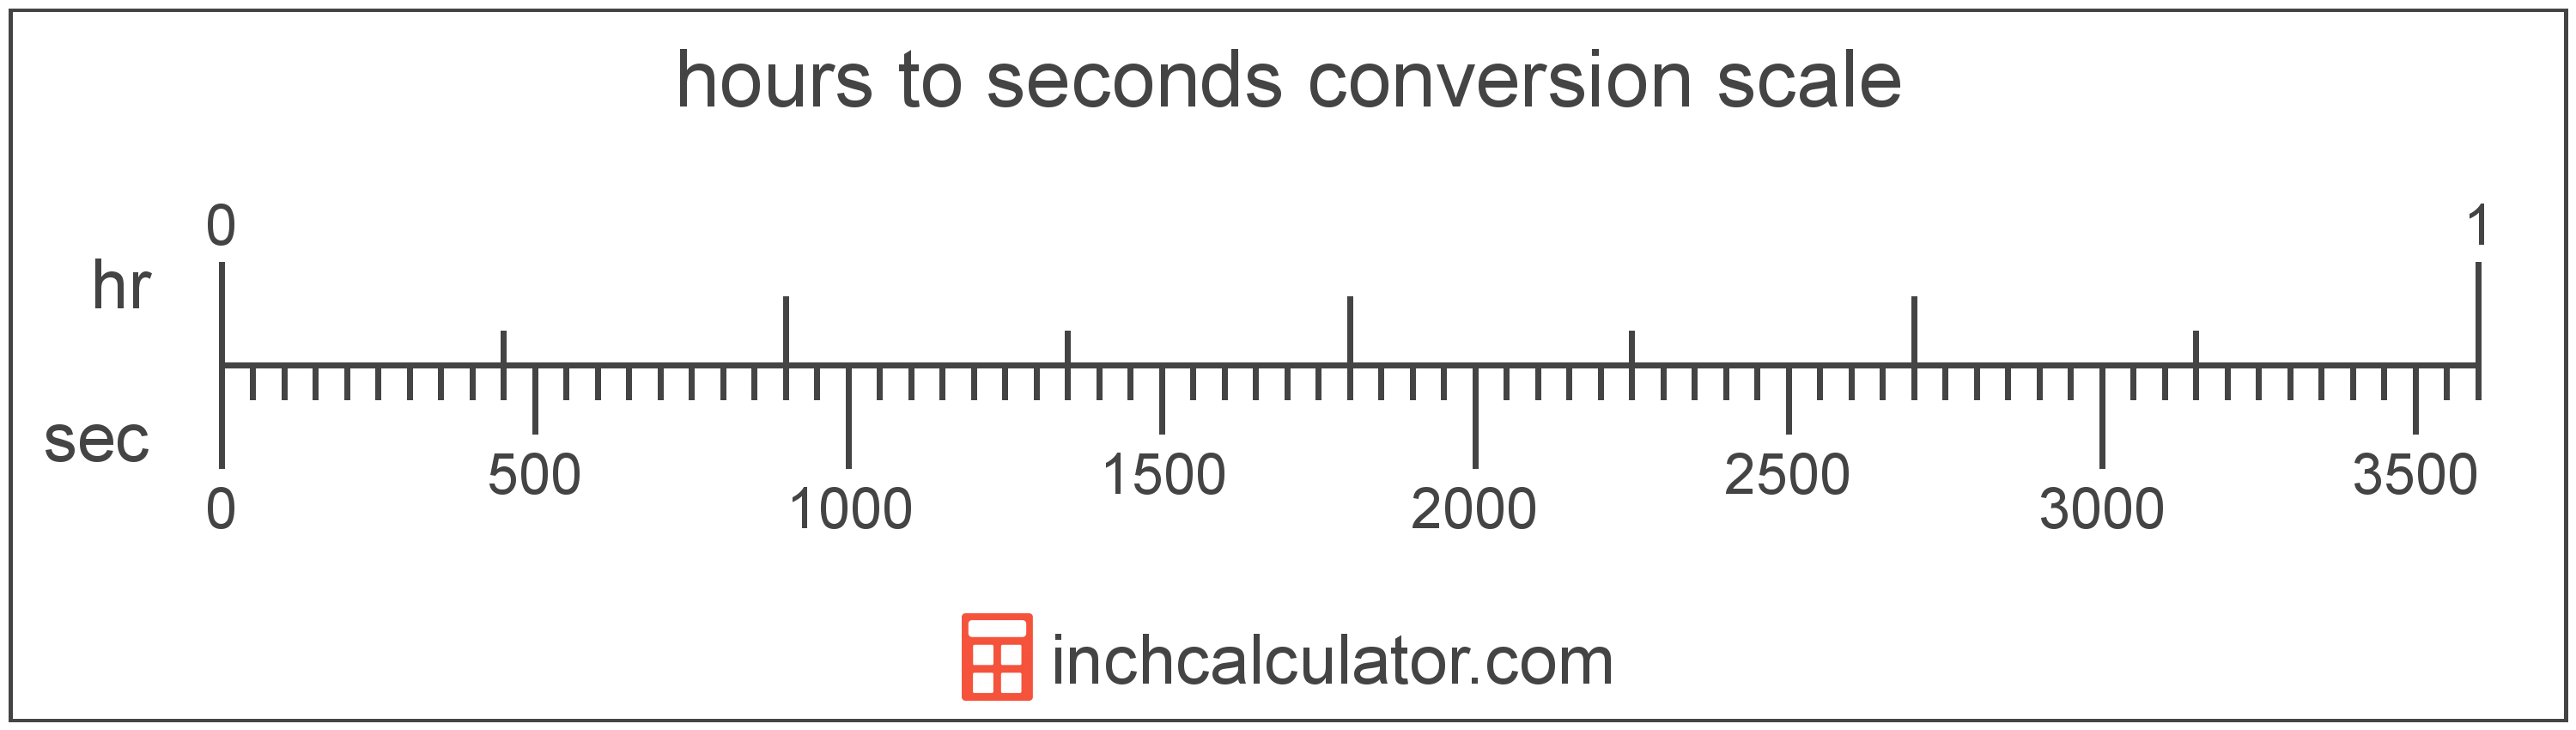 Minutes To 100ths Of An Hour Conversion Chart